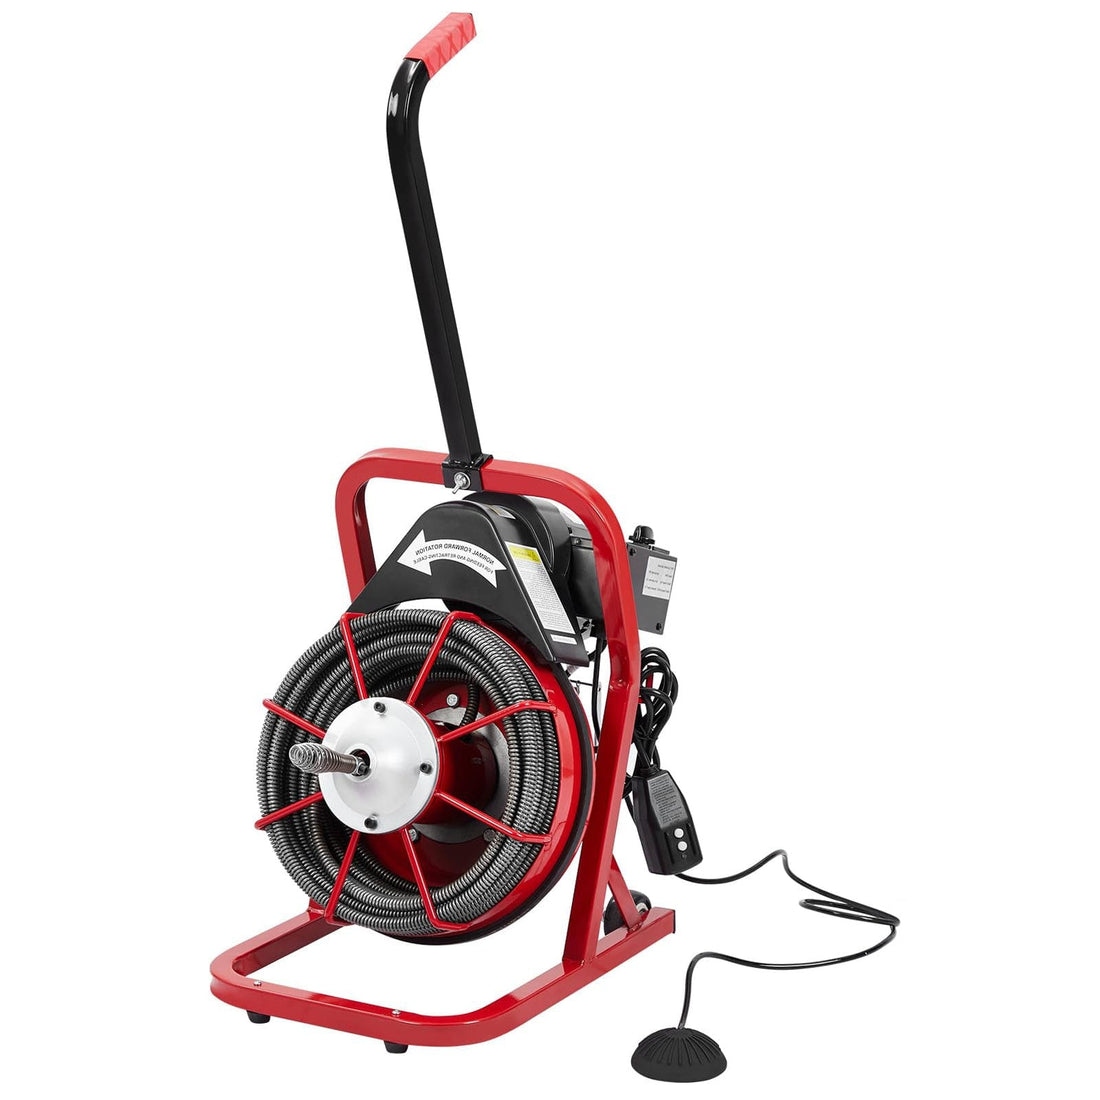 75Ft x 1/2 Inch Drain Cleaner Machine, for 1 to 4 Inch Pipes